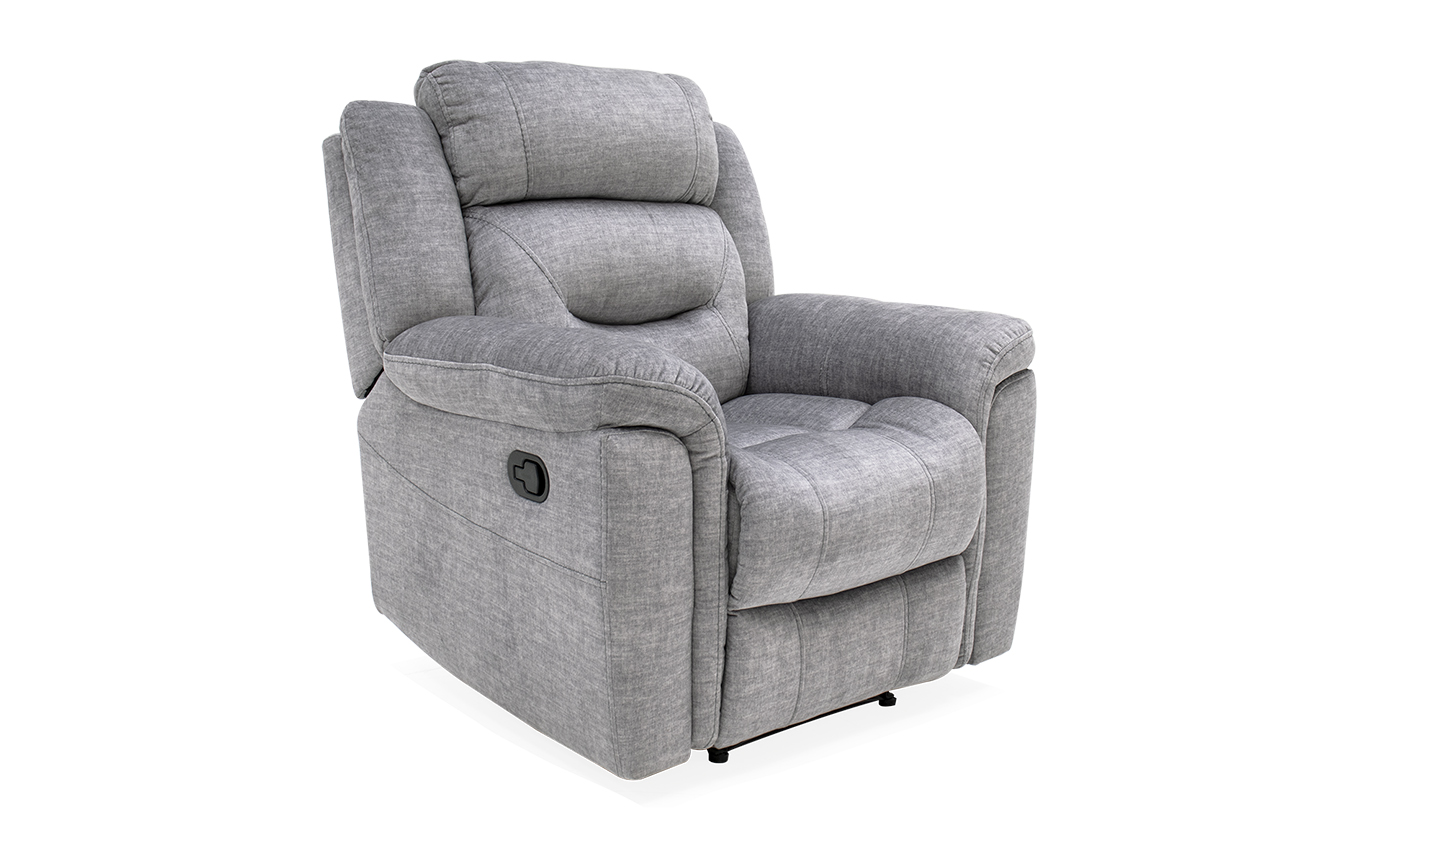 Dudley Grey 1 Seater Recliner